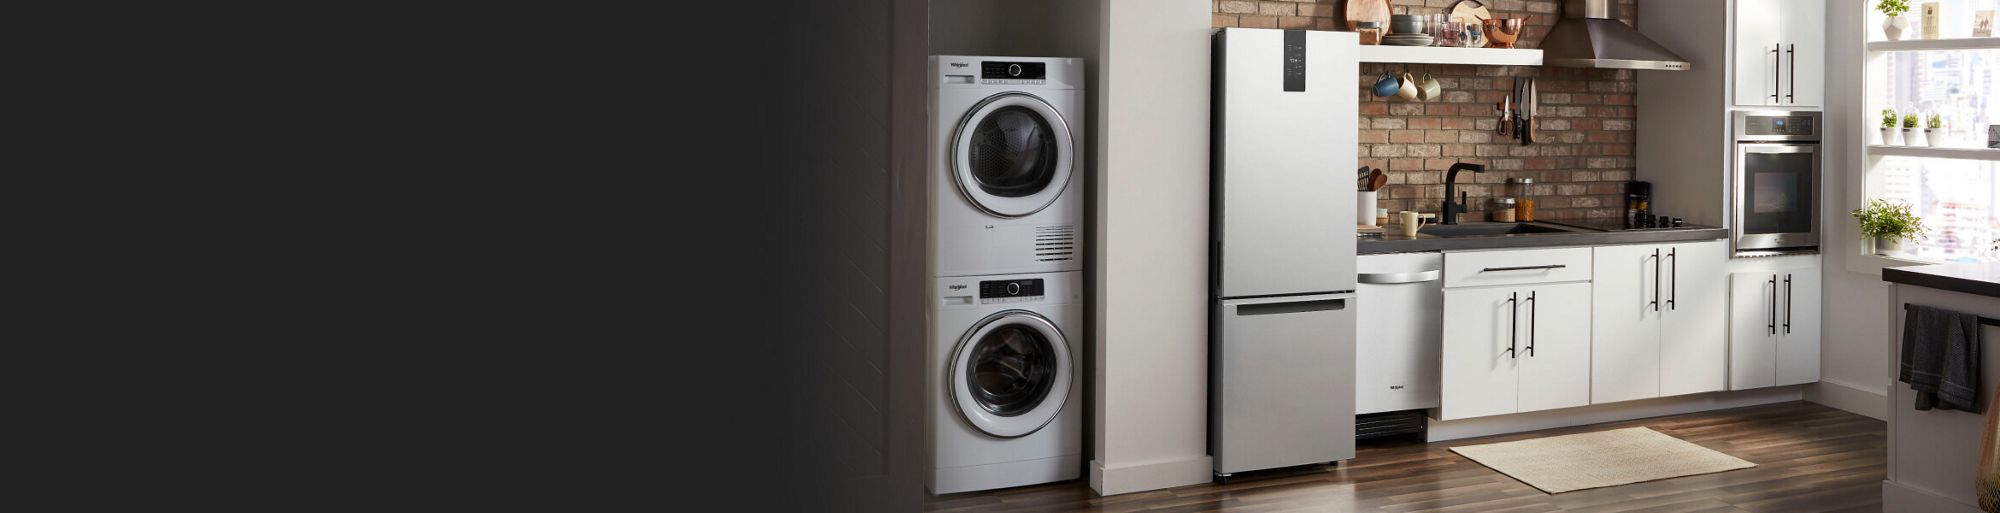 Whirlpool® small space kitchen appliances.